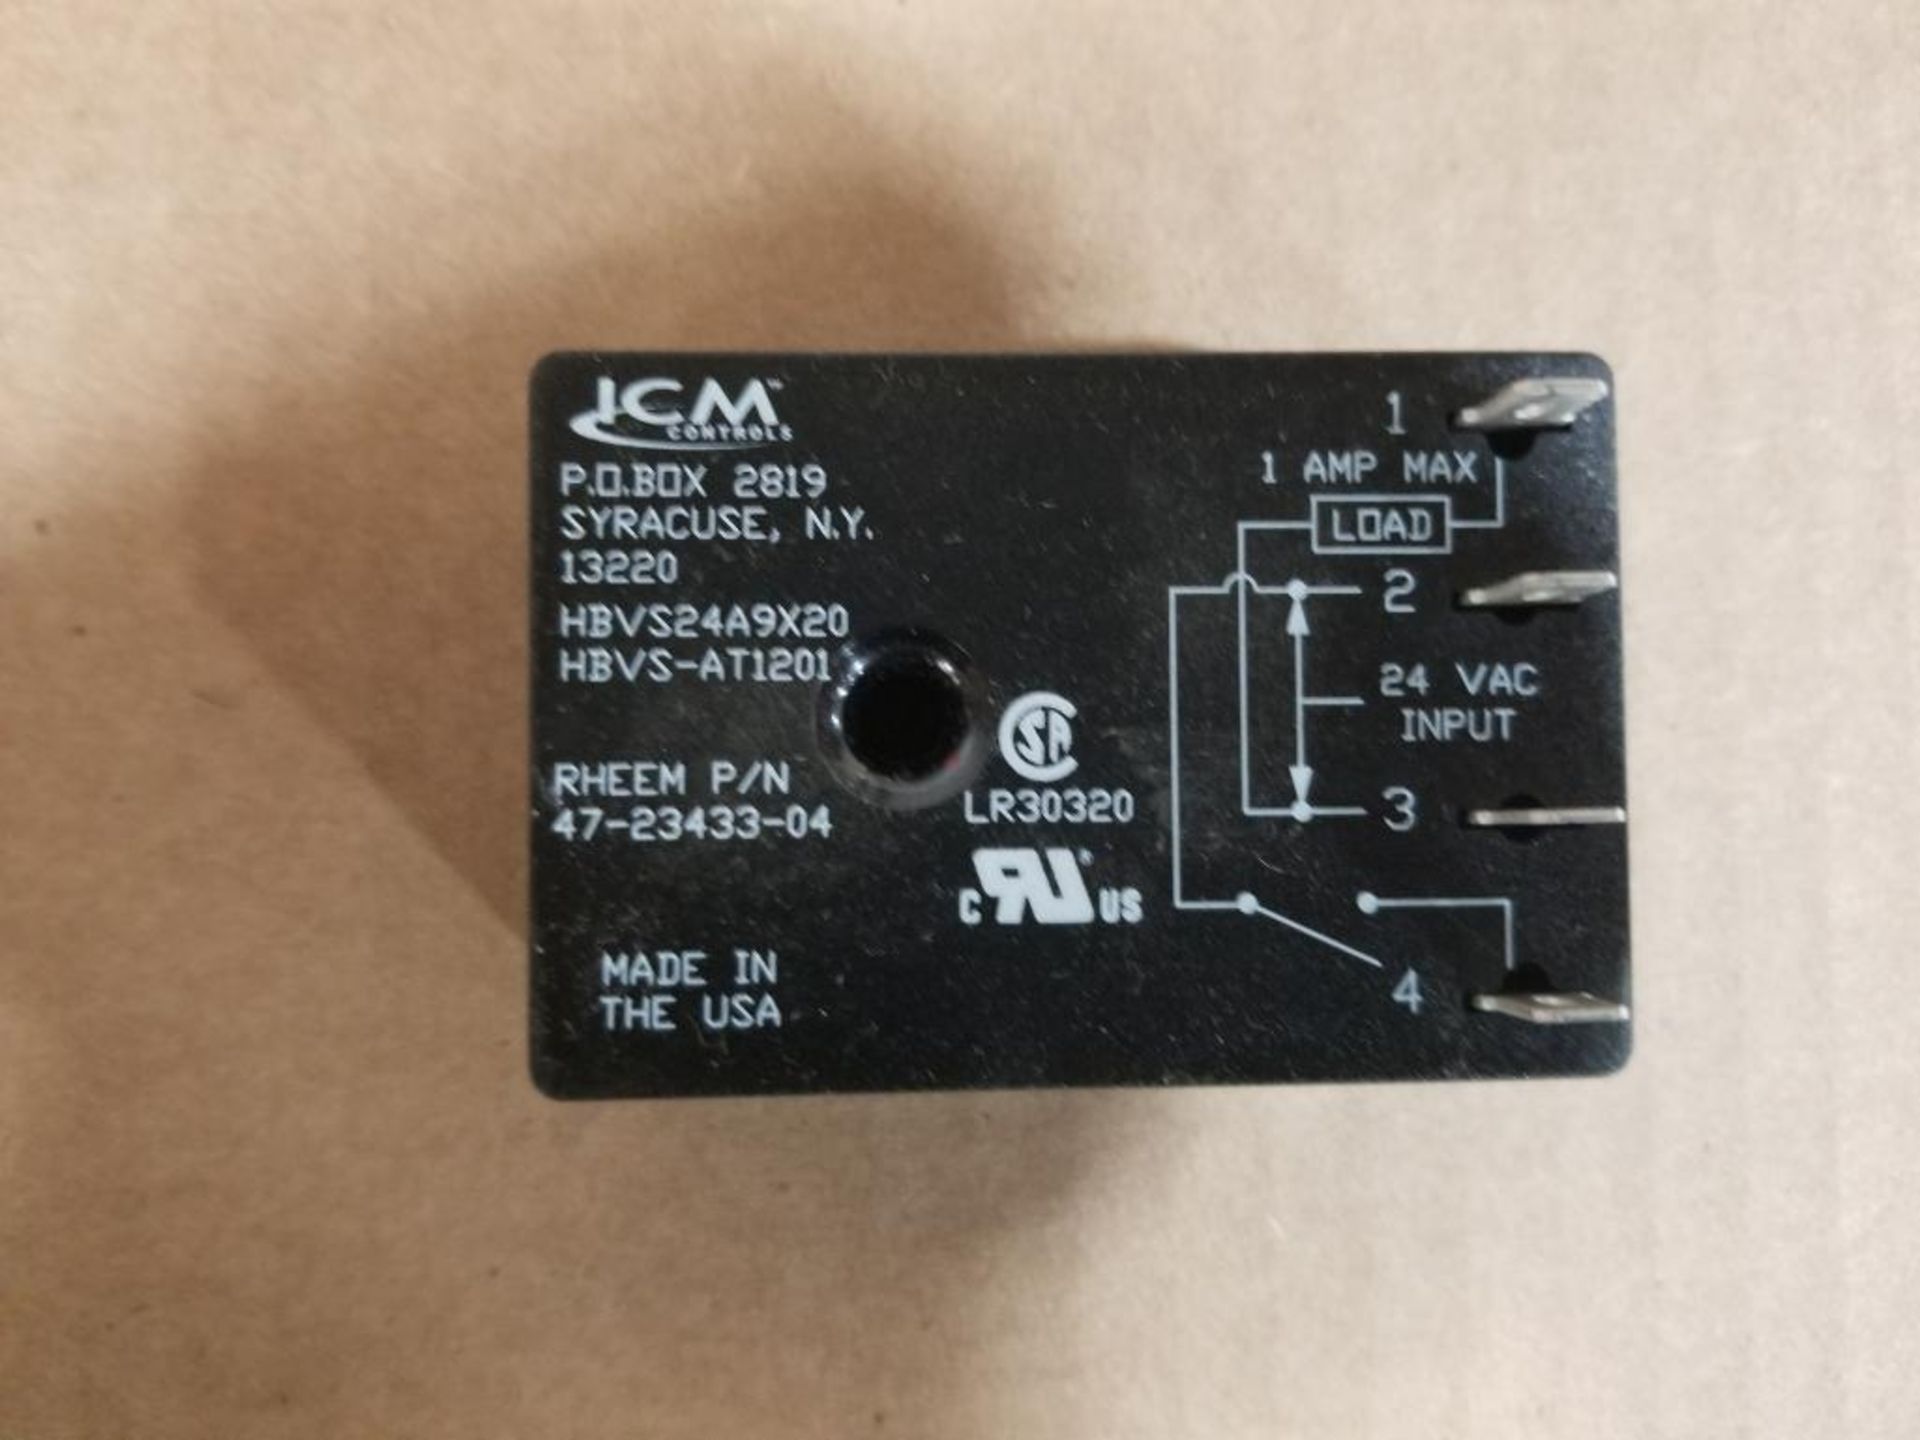 Qty 50 - ICM Components controller. Rheem part number 47-23433-04. - Image 3 of 3